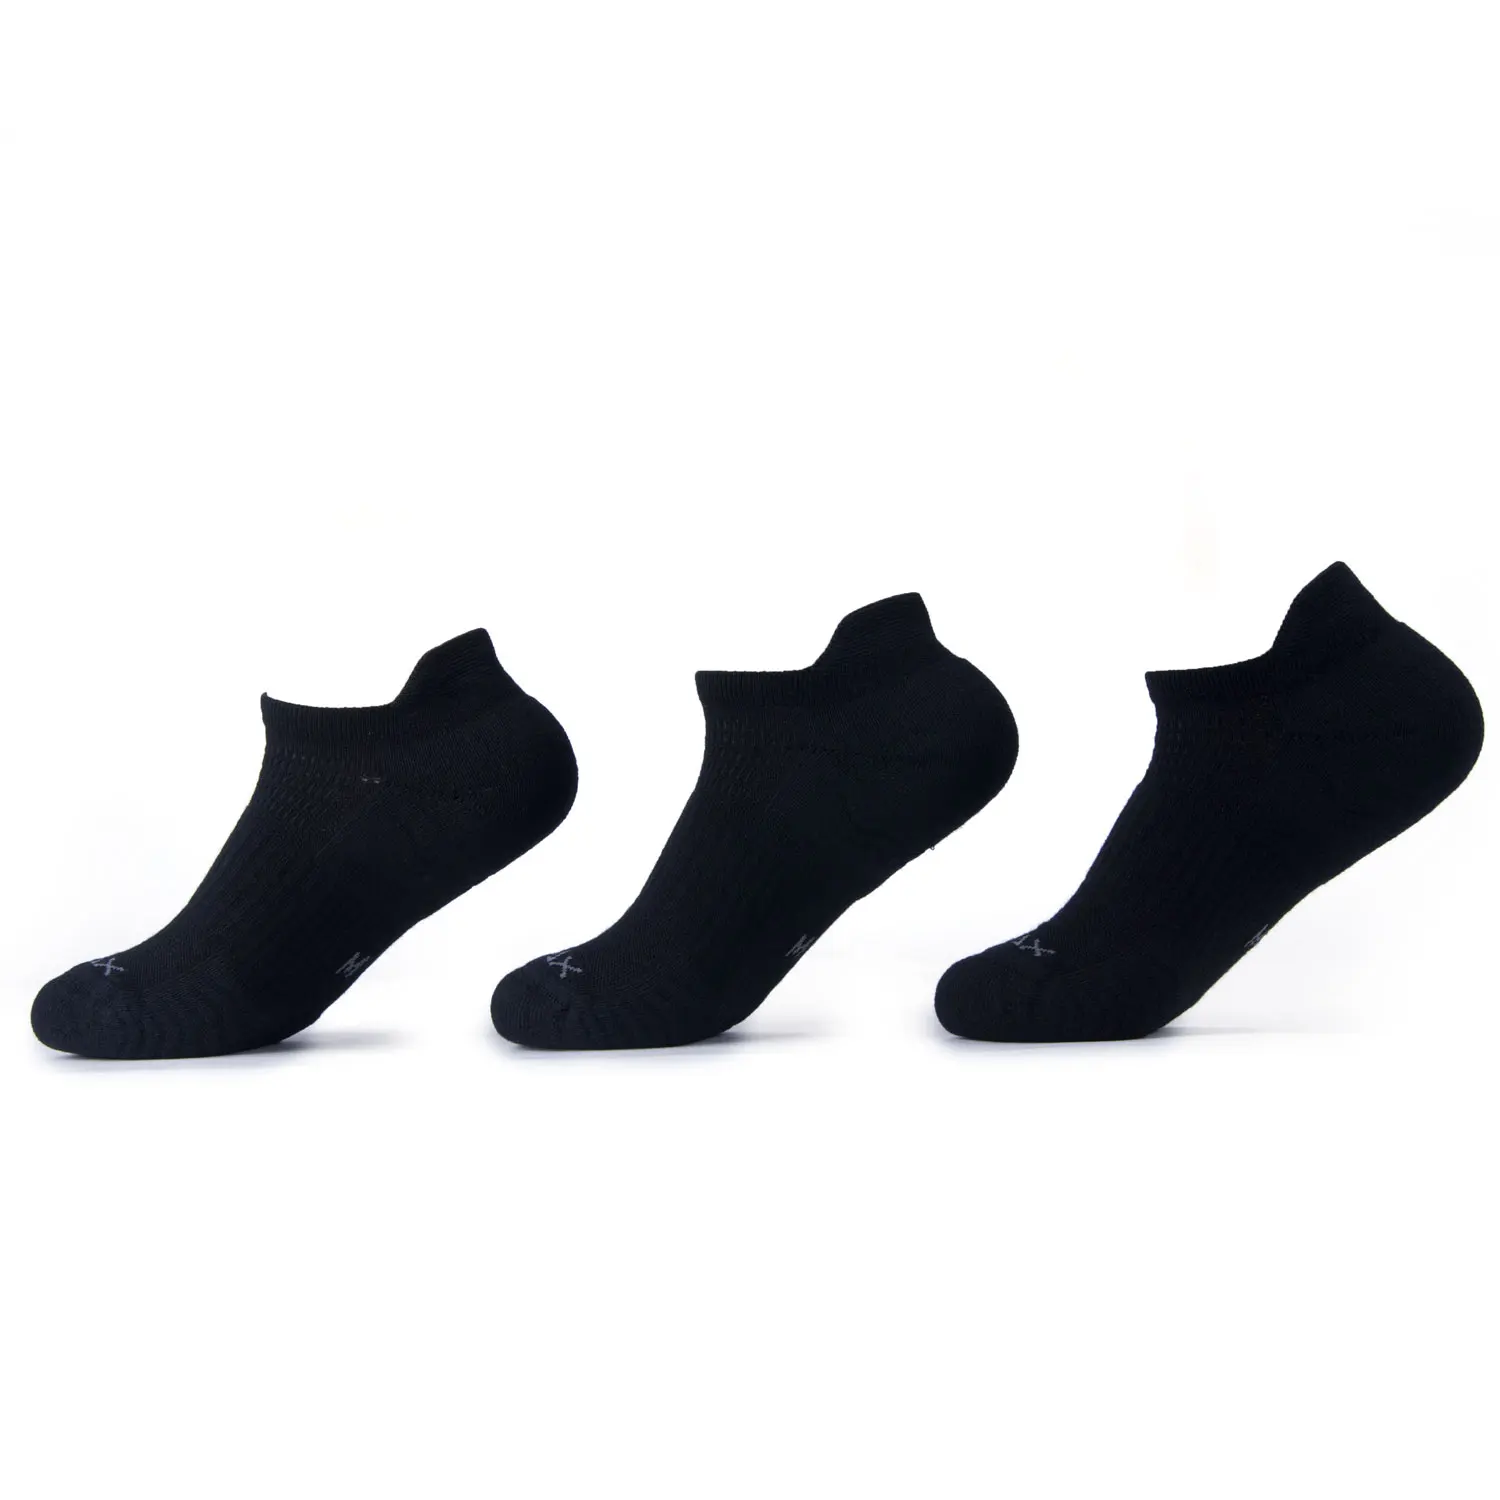 

SOLAX 3 pairs Women's Coolmax Cotton Athletic Sport Ankle Low Cut Hiking & Running Socks